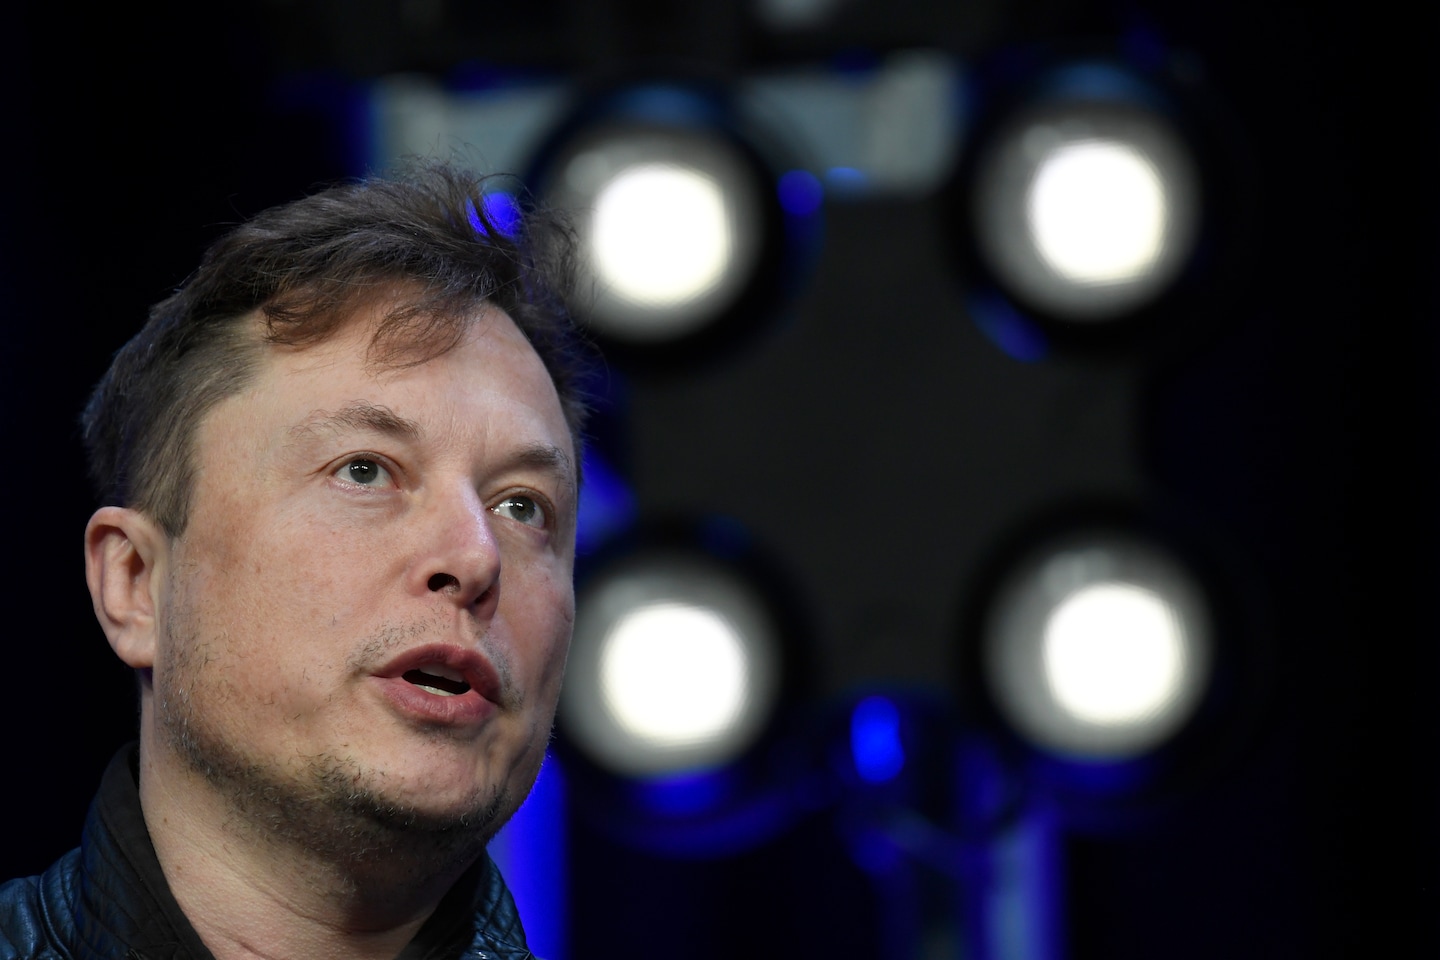 Elon Musk appointed to Twitter board